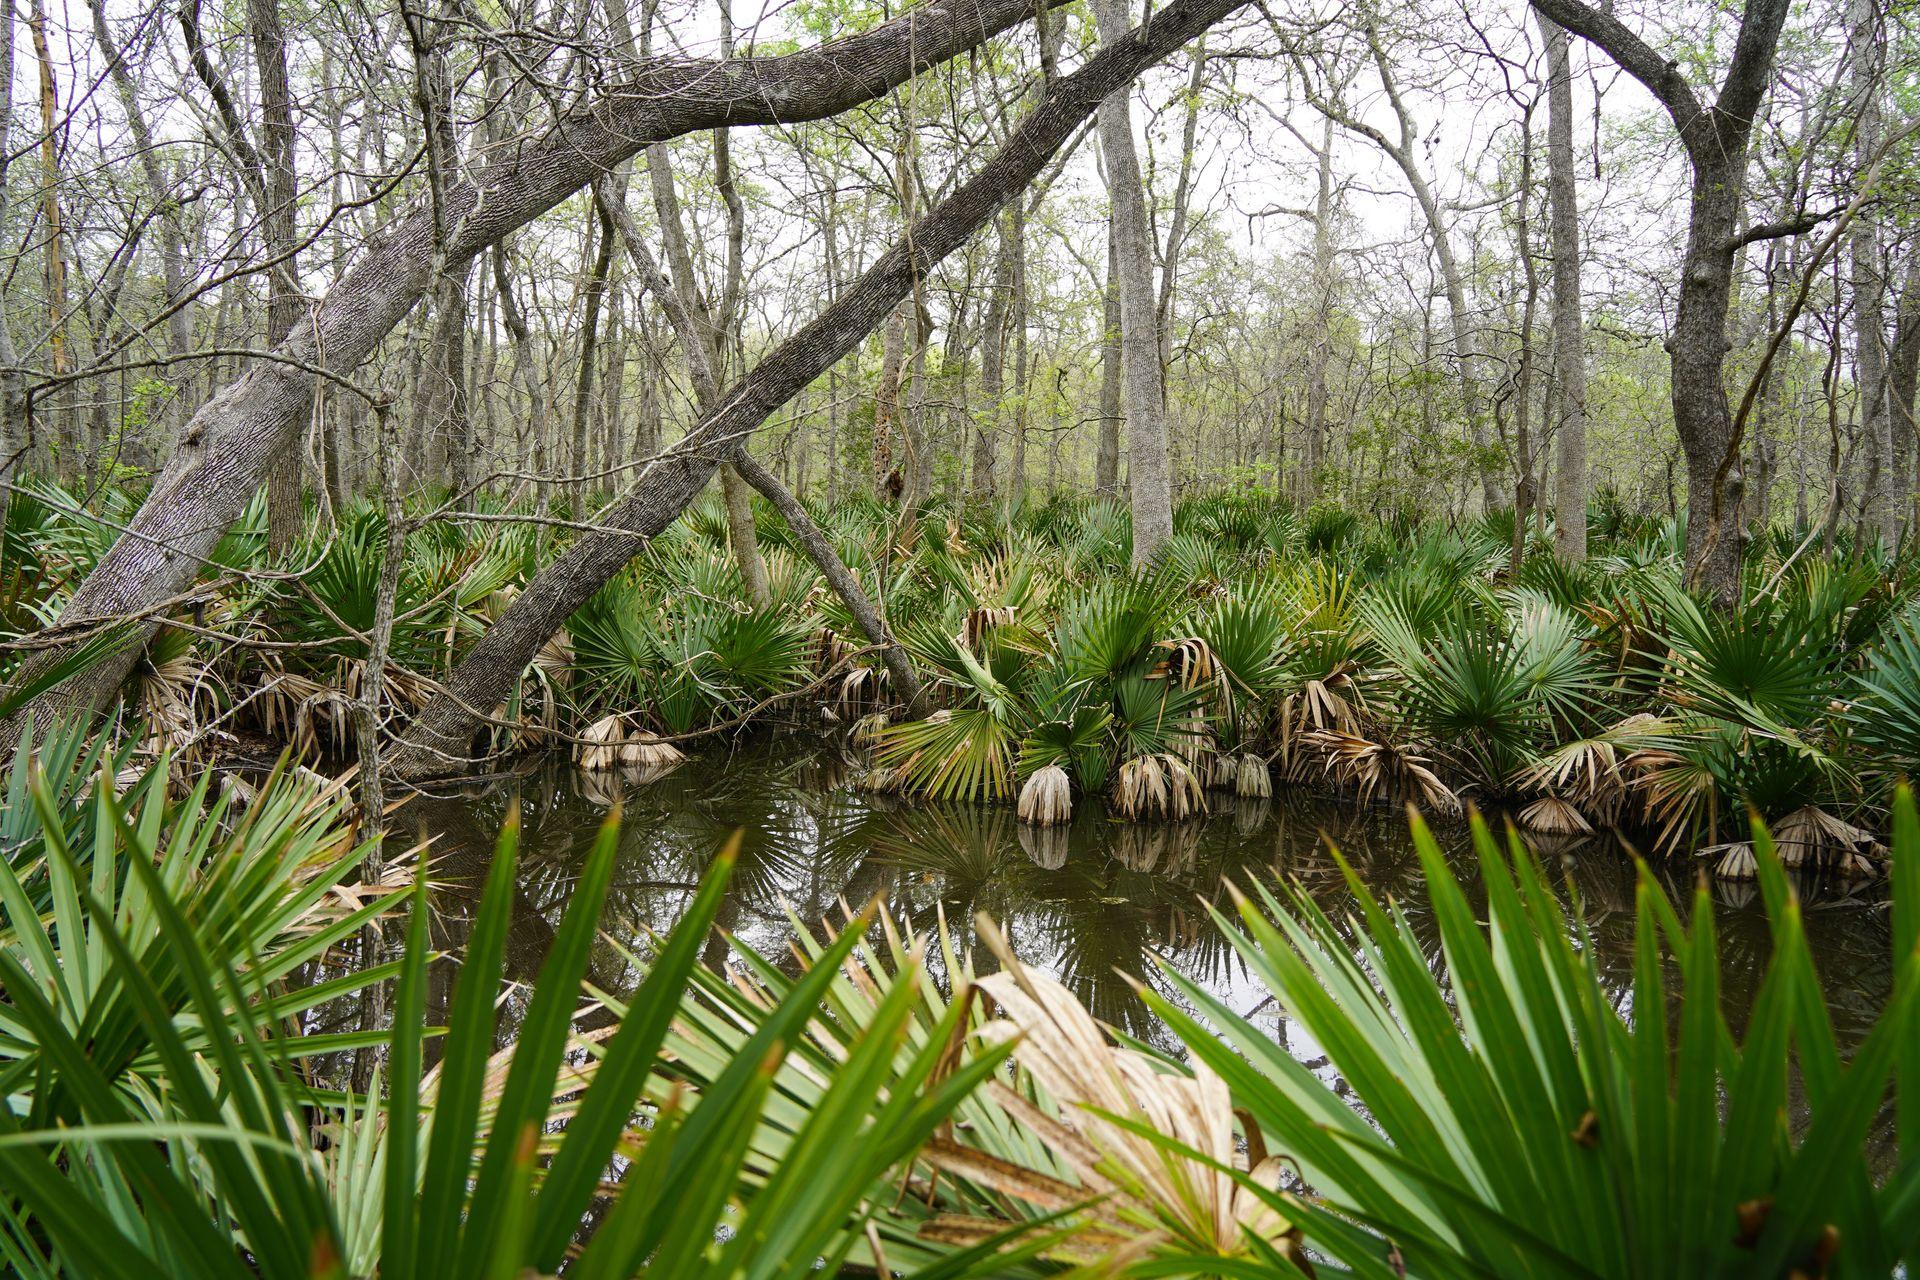 A small pond surrounded by bright green palmetto trees.